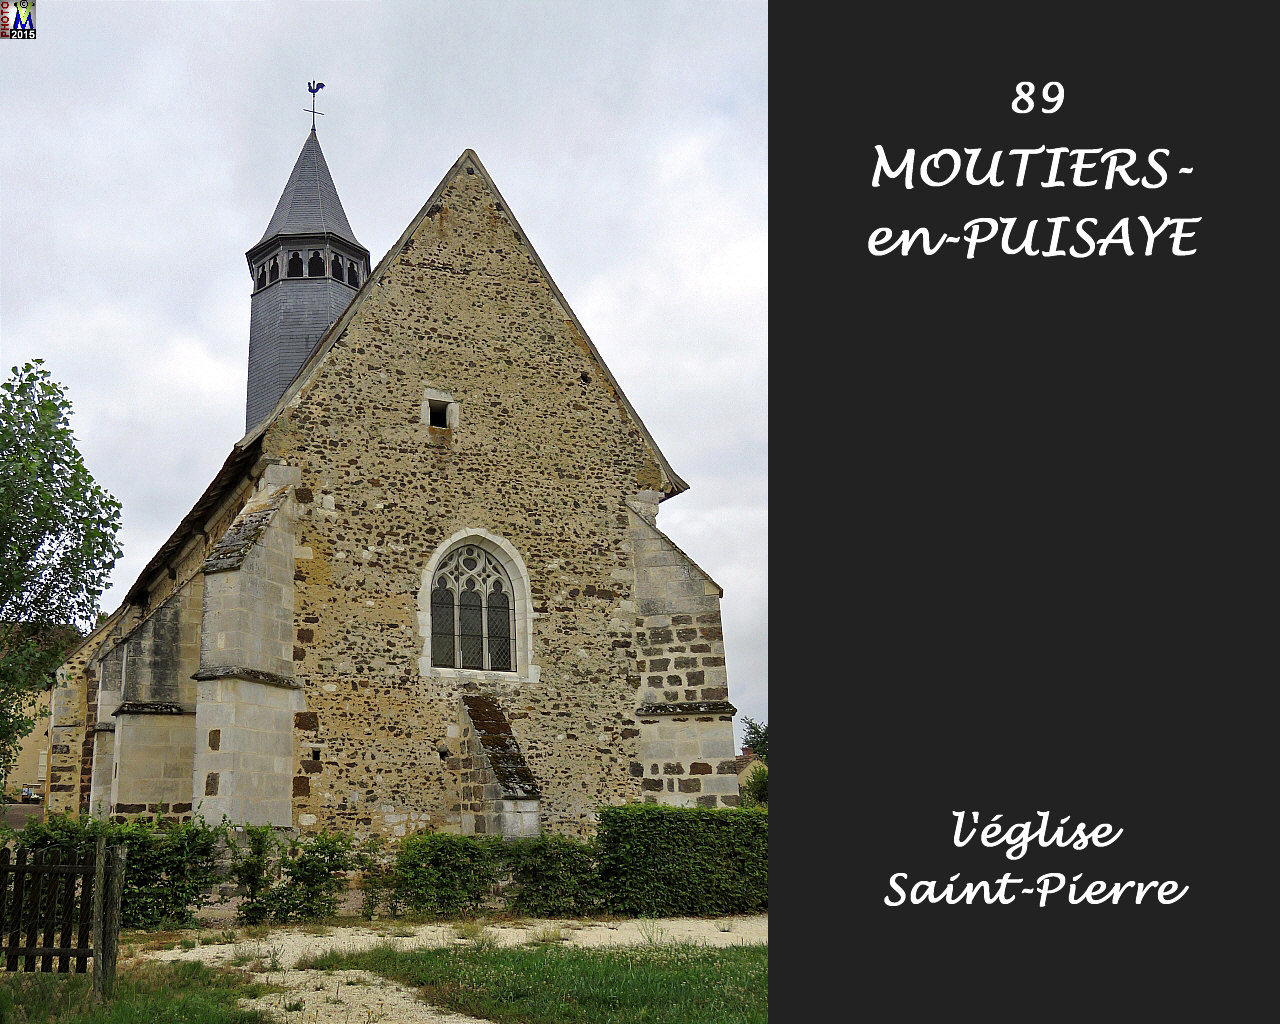 89MOUTIERS-PUISAYE_eglise_106.jpg